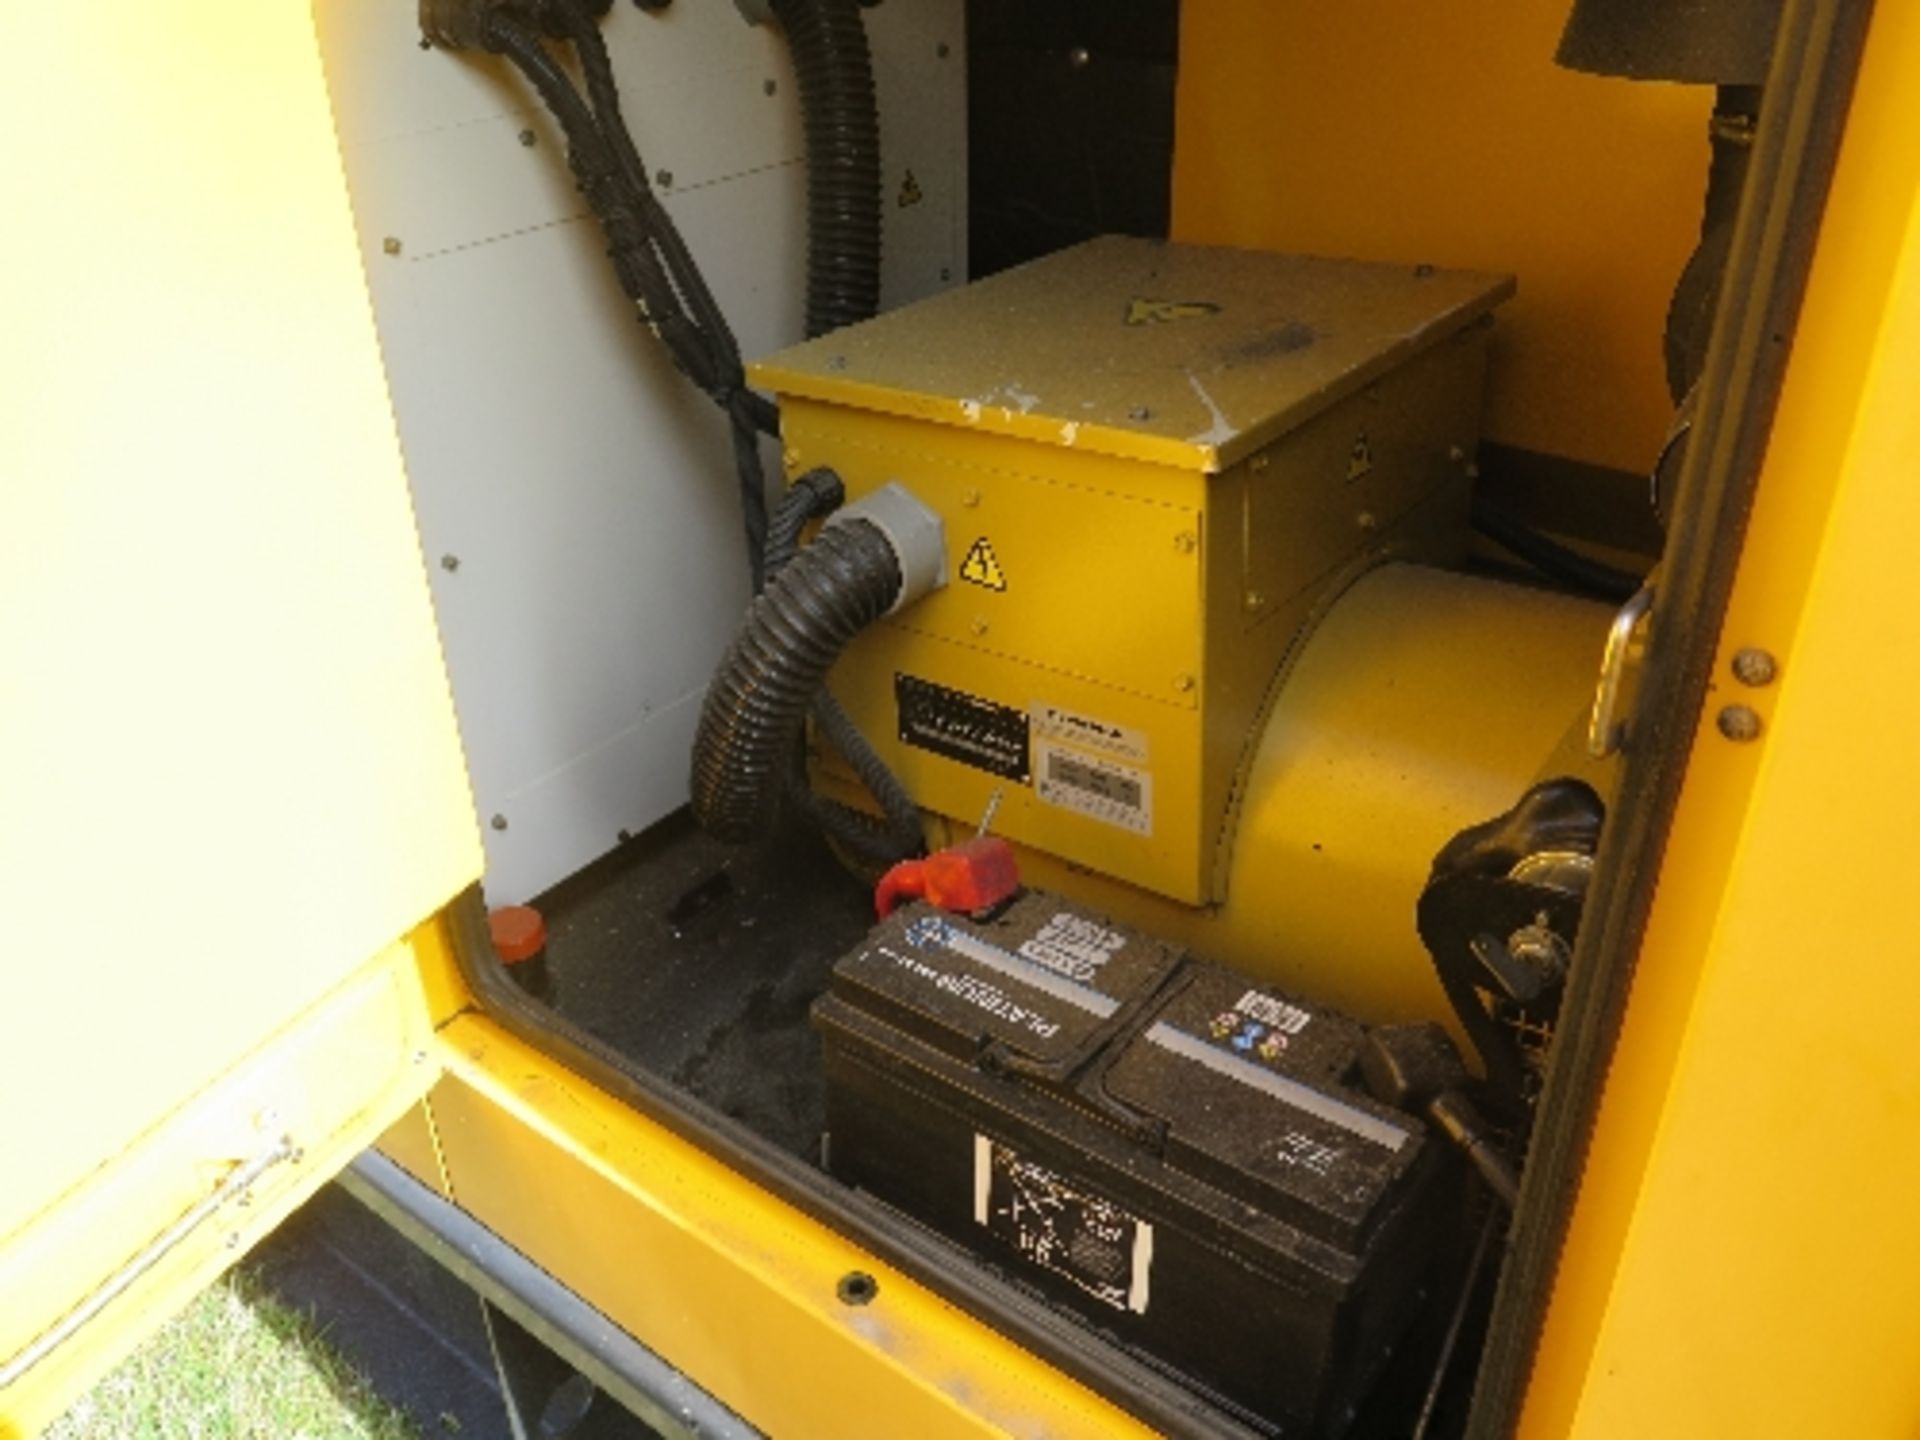 Caterpillar XQE80 generator 14819 hrs 157811
PERKINS - RUNS AND MAKES POWER
ALL LOTS are SOLD AS - Image 5 of 6